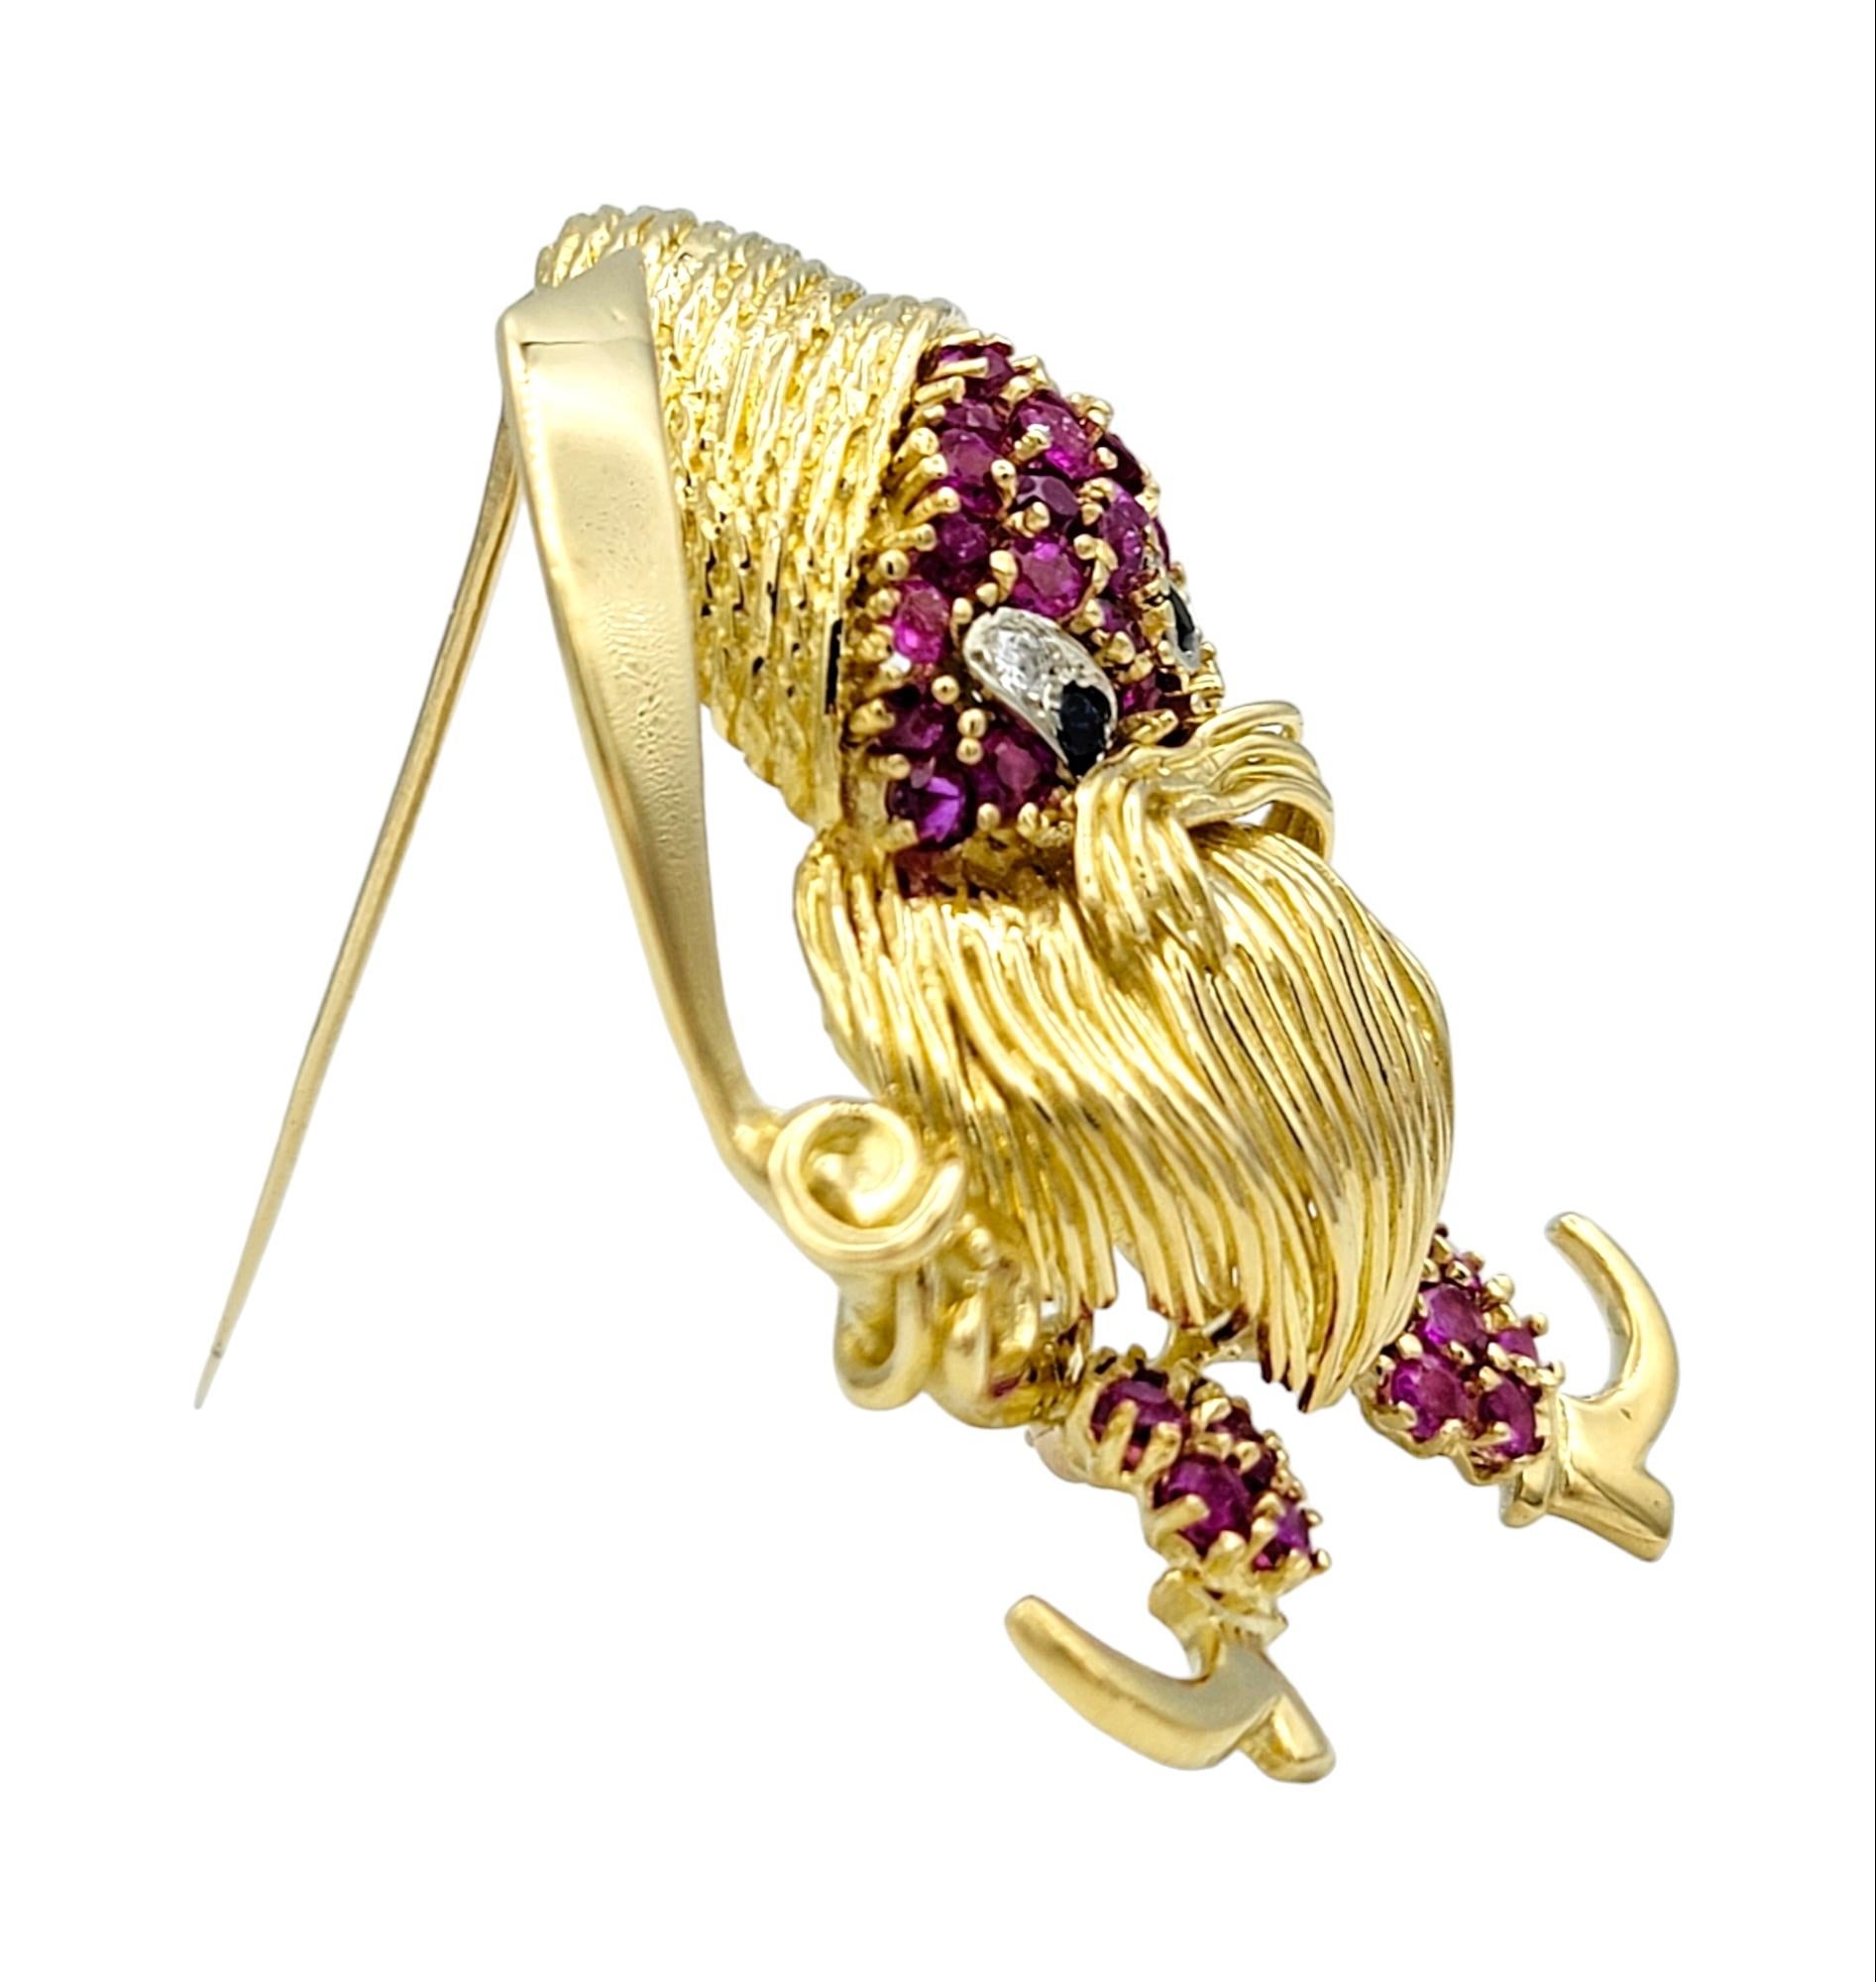 Contemporary Playful Pirate Brooch with Rubies, Sapphires and Diamonds, 18 Karat Yellow Gold For Sale